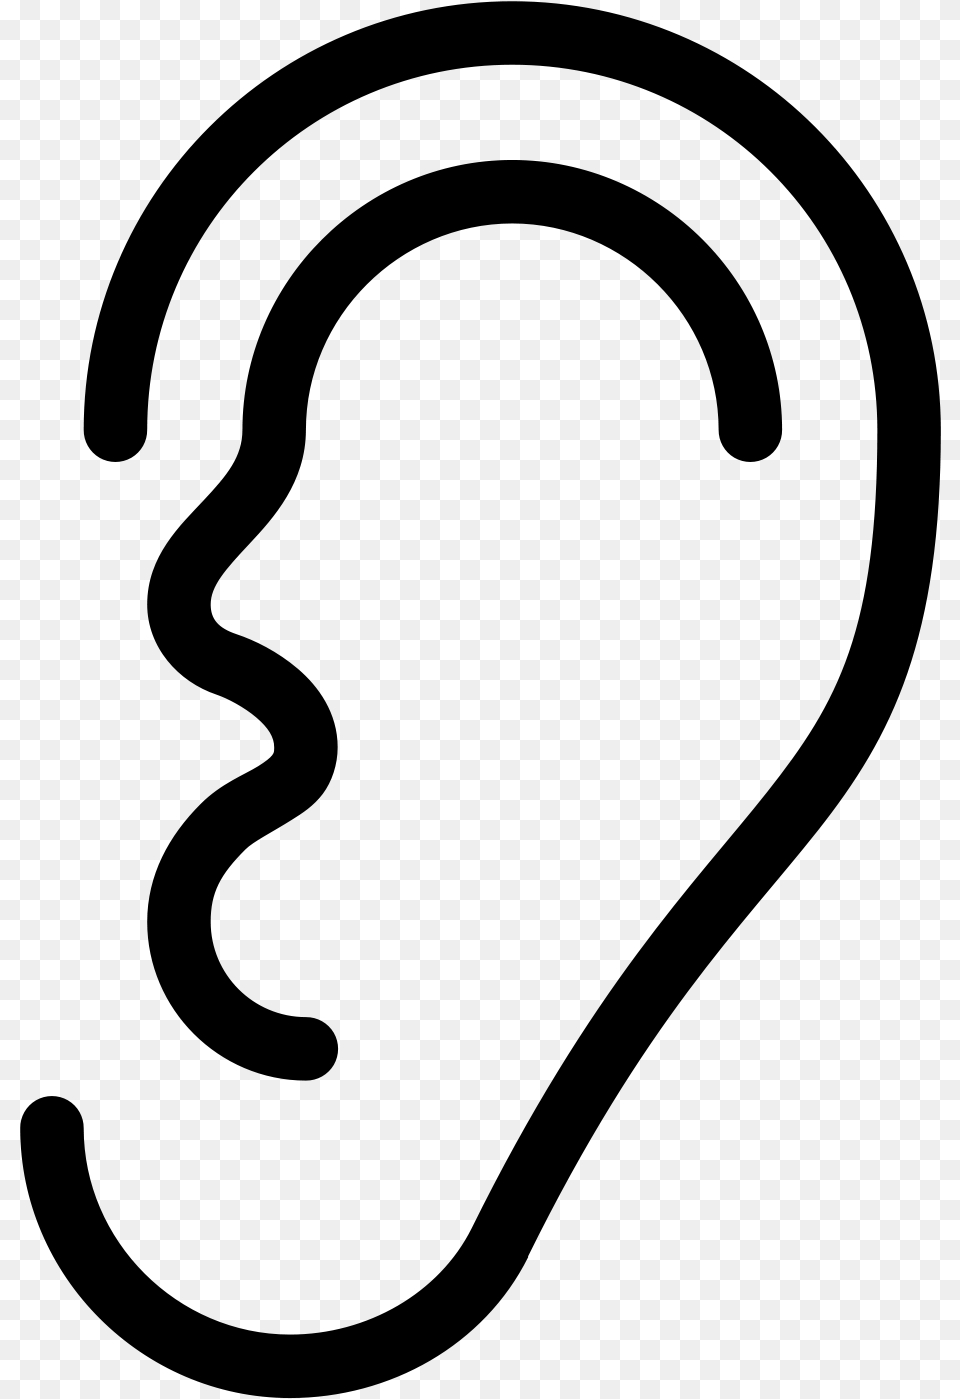 This Is A Basic Image Of The Human Ear Deaf, Gray Free Png